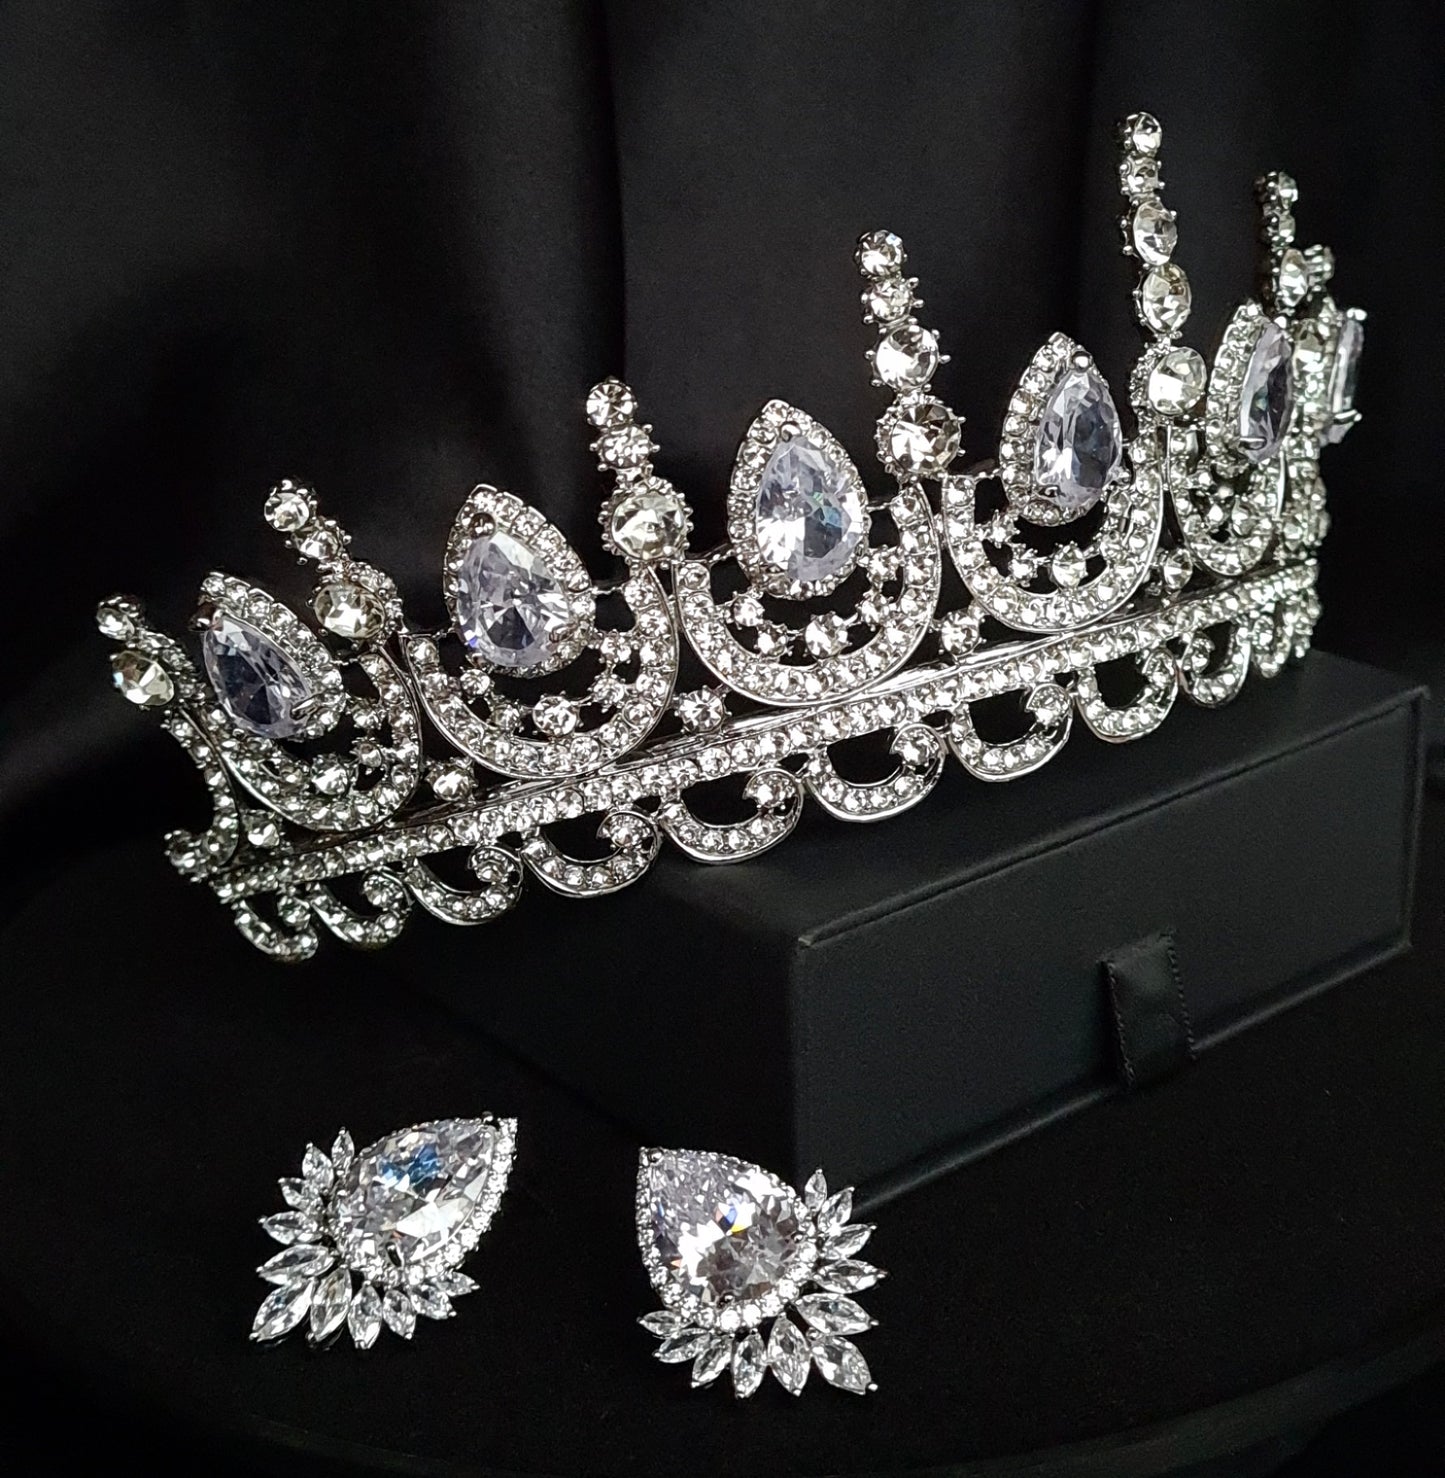 A tiara and earrings set sitting on a black box. The tiara is made of silver and has a delicate design with crystals and cubic zirconia. The earrings are also made of silver and have a matching design.